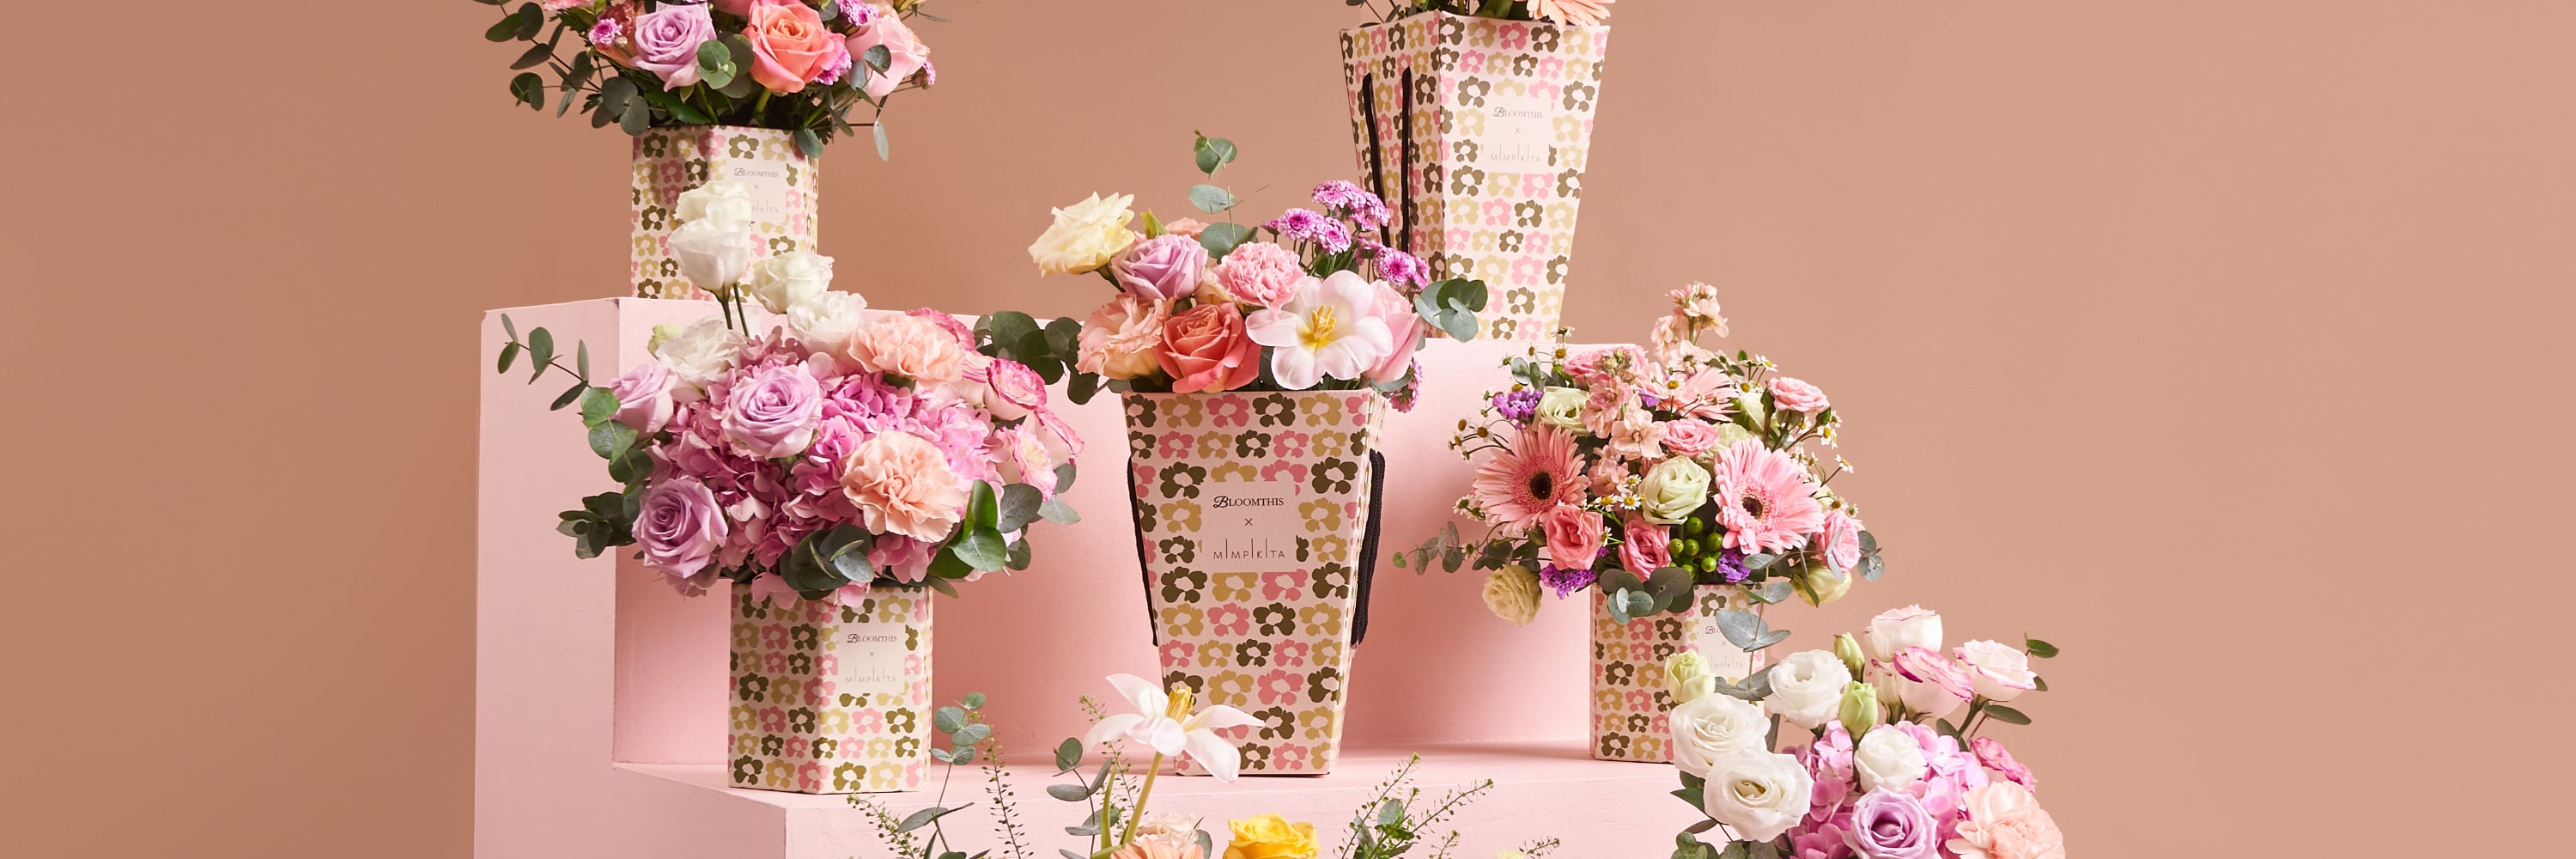 BloomThis x Mimpkita Flower Boxes and BloomBags